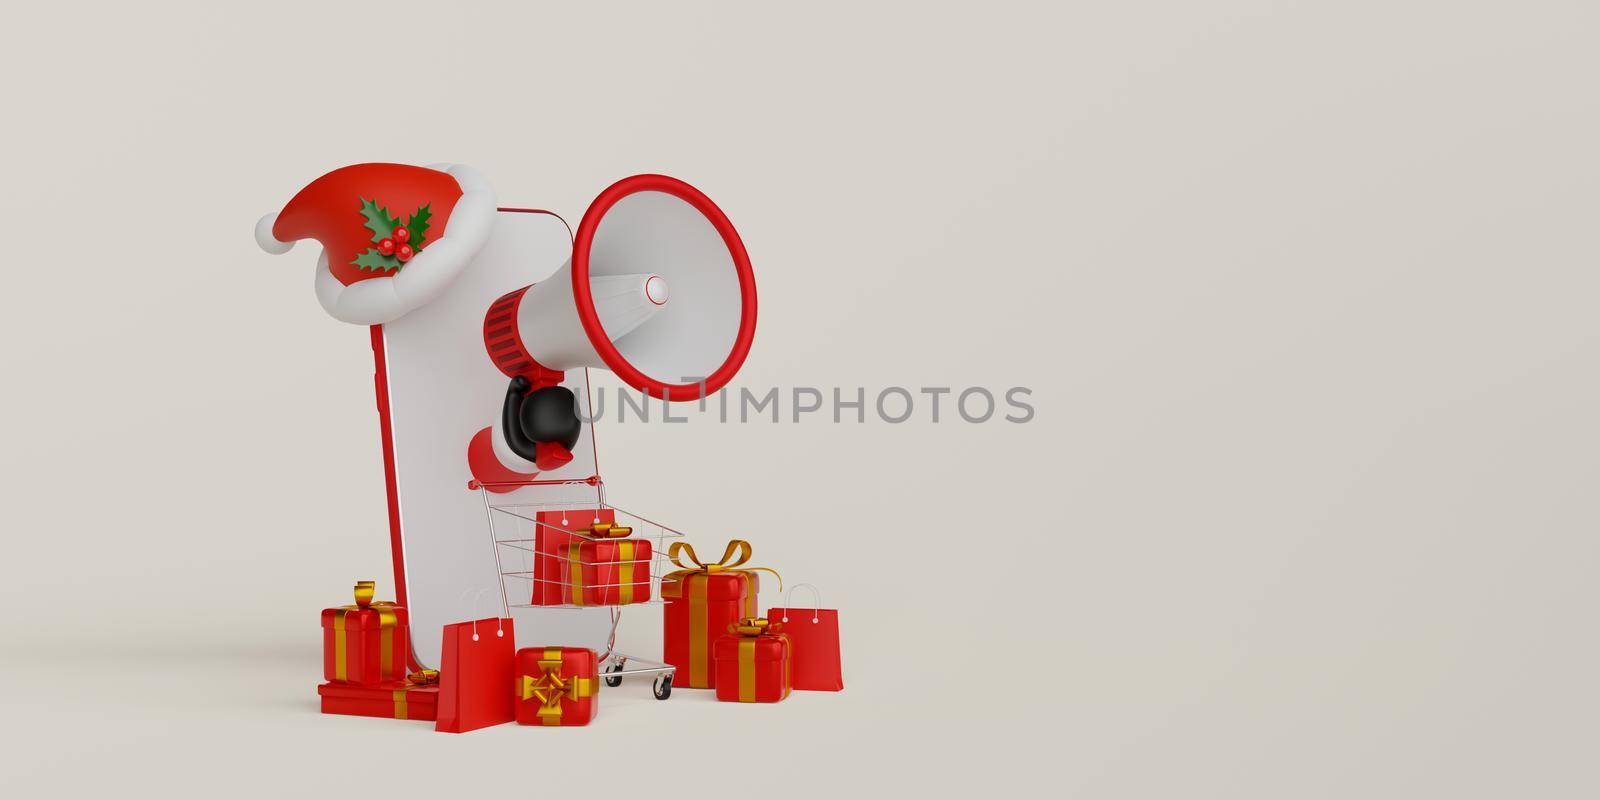 Christmas advertisement banner, Shopping online on mobile concept, Santa Claus hand holding megaphone pop out from mobile with shopping cart and gift box, 3d illustration by nutzchotwarut